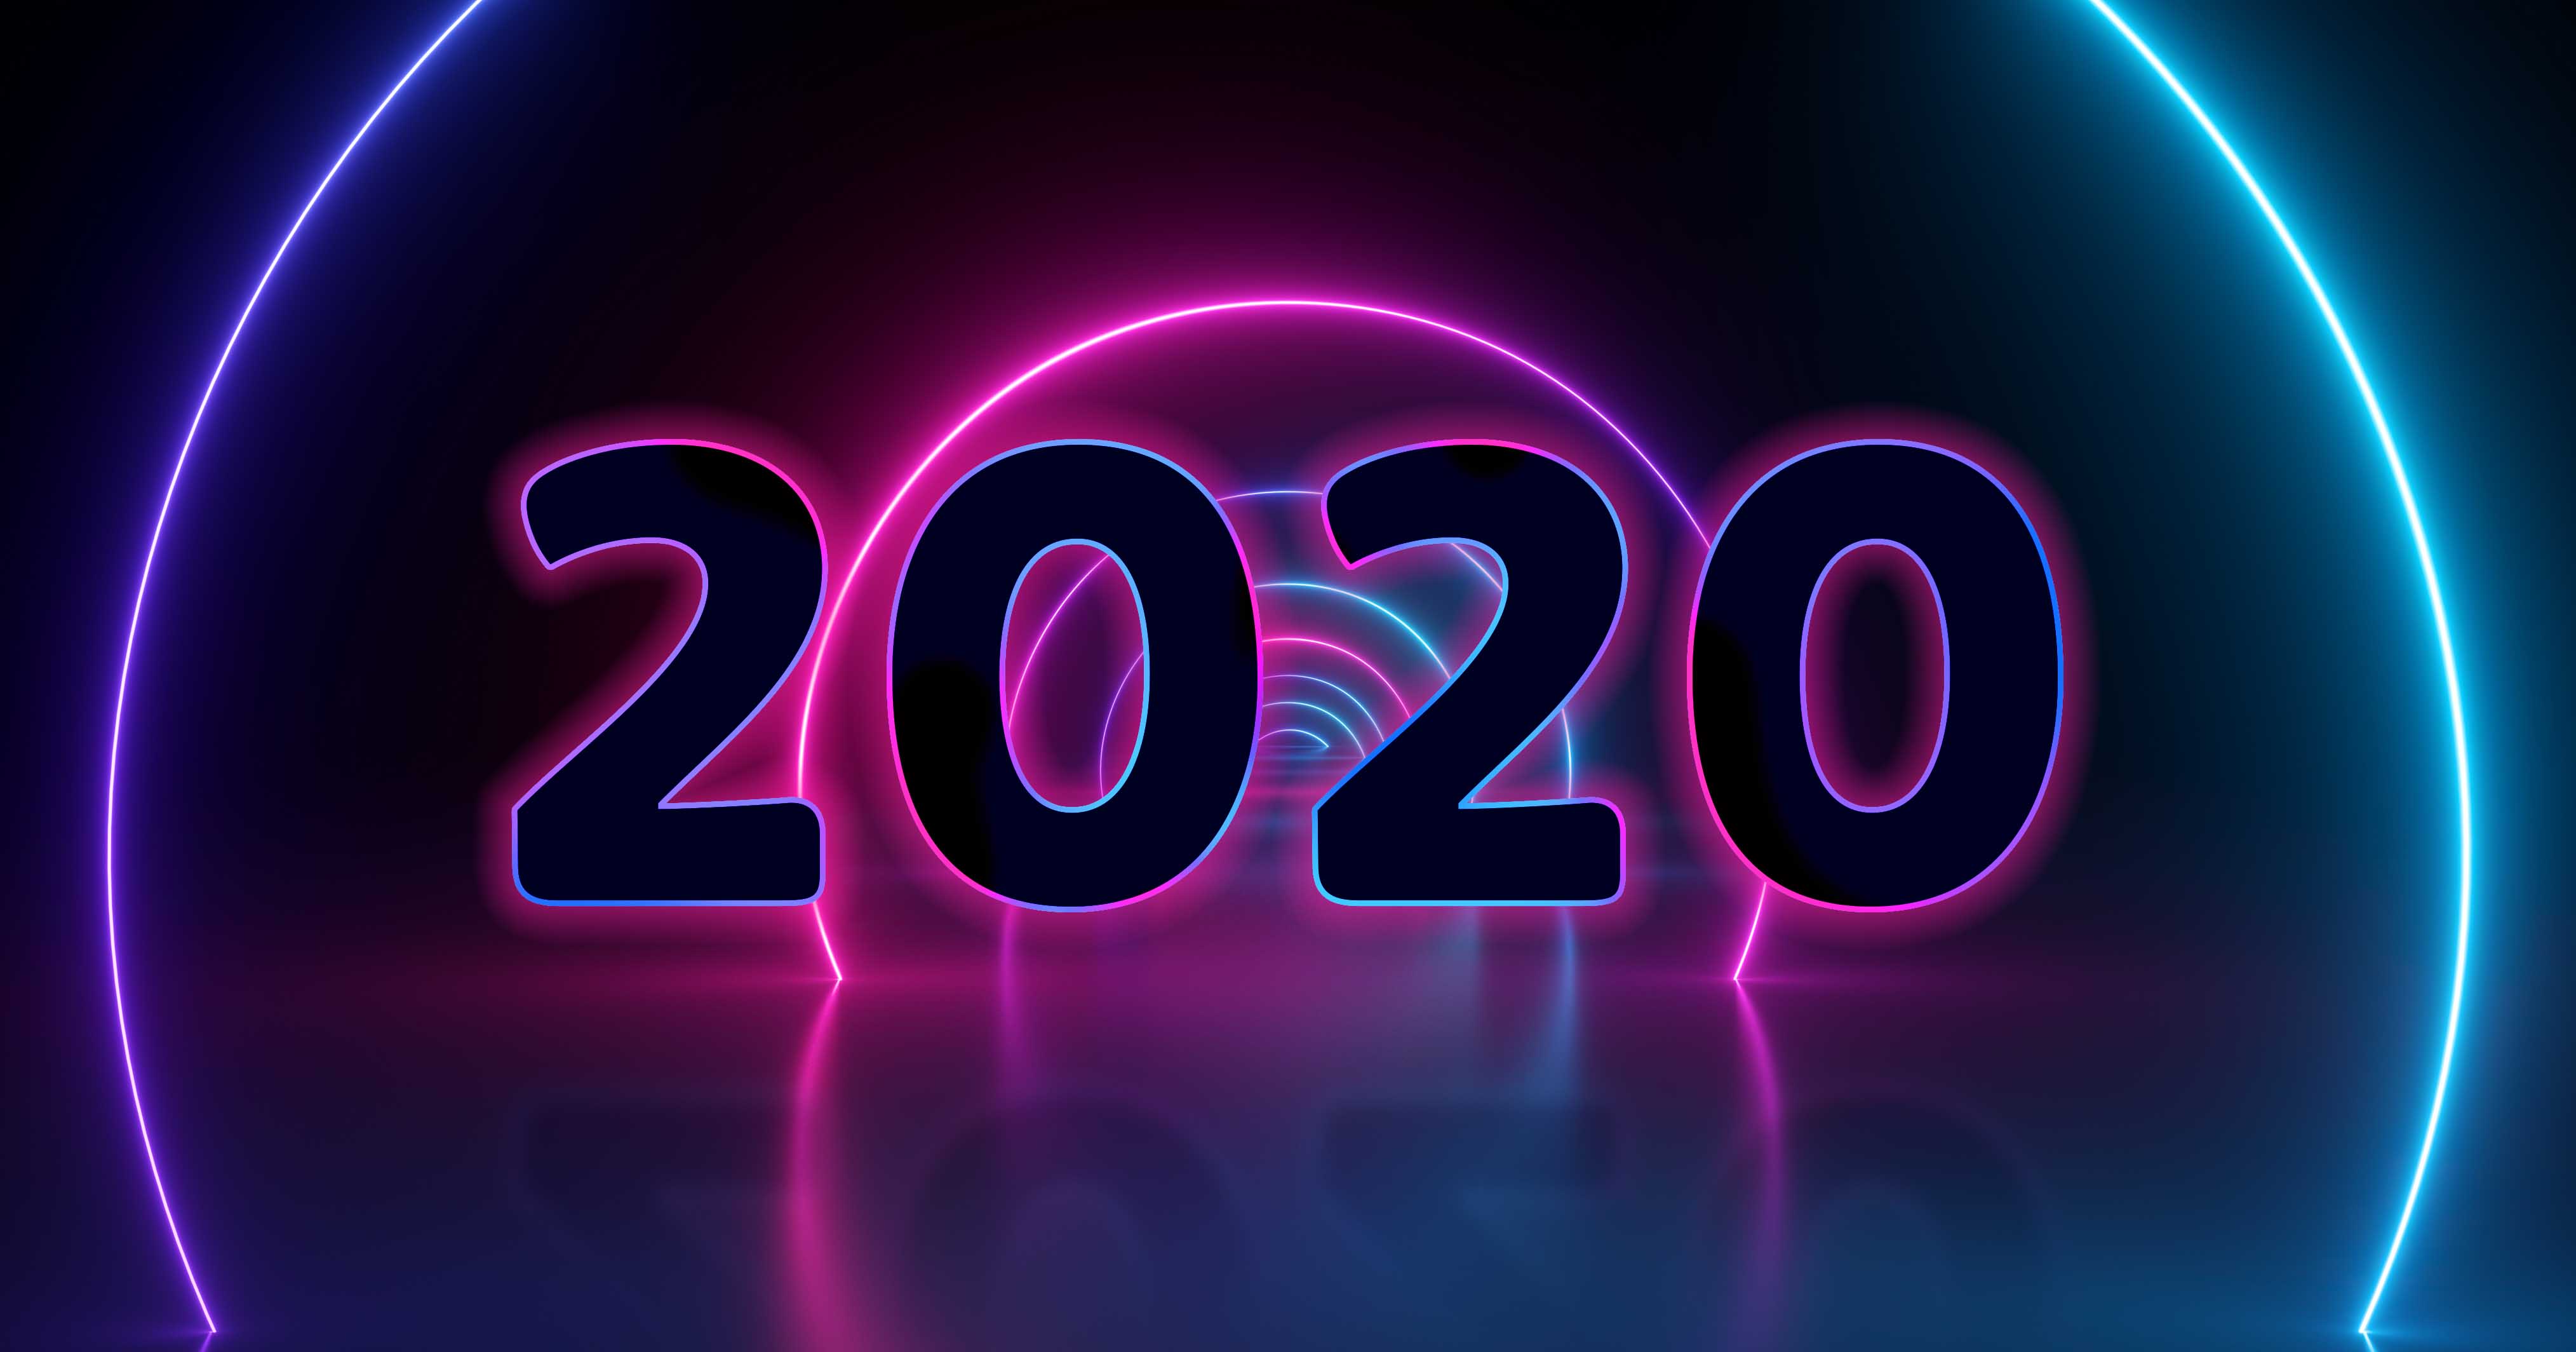 An iamge of the number '2020' against a neon background.